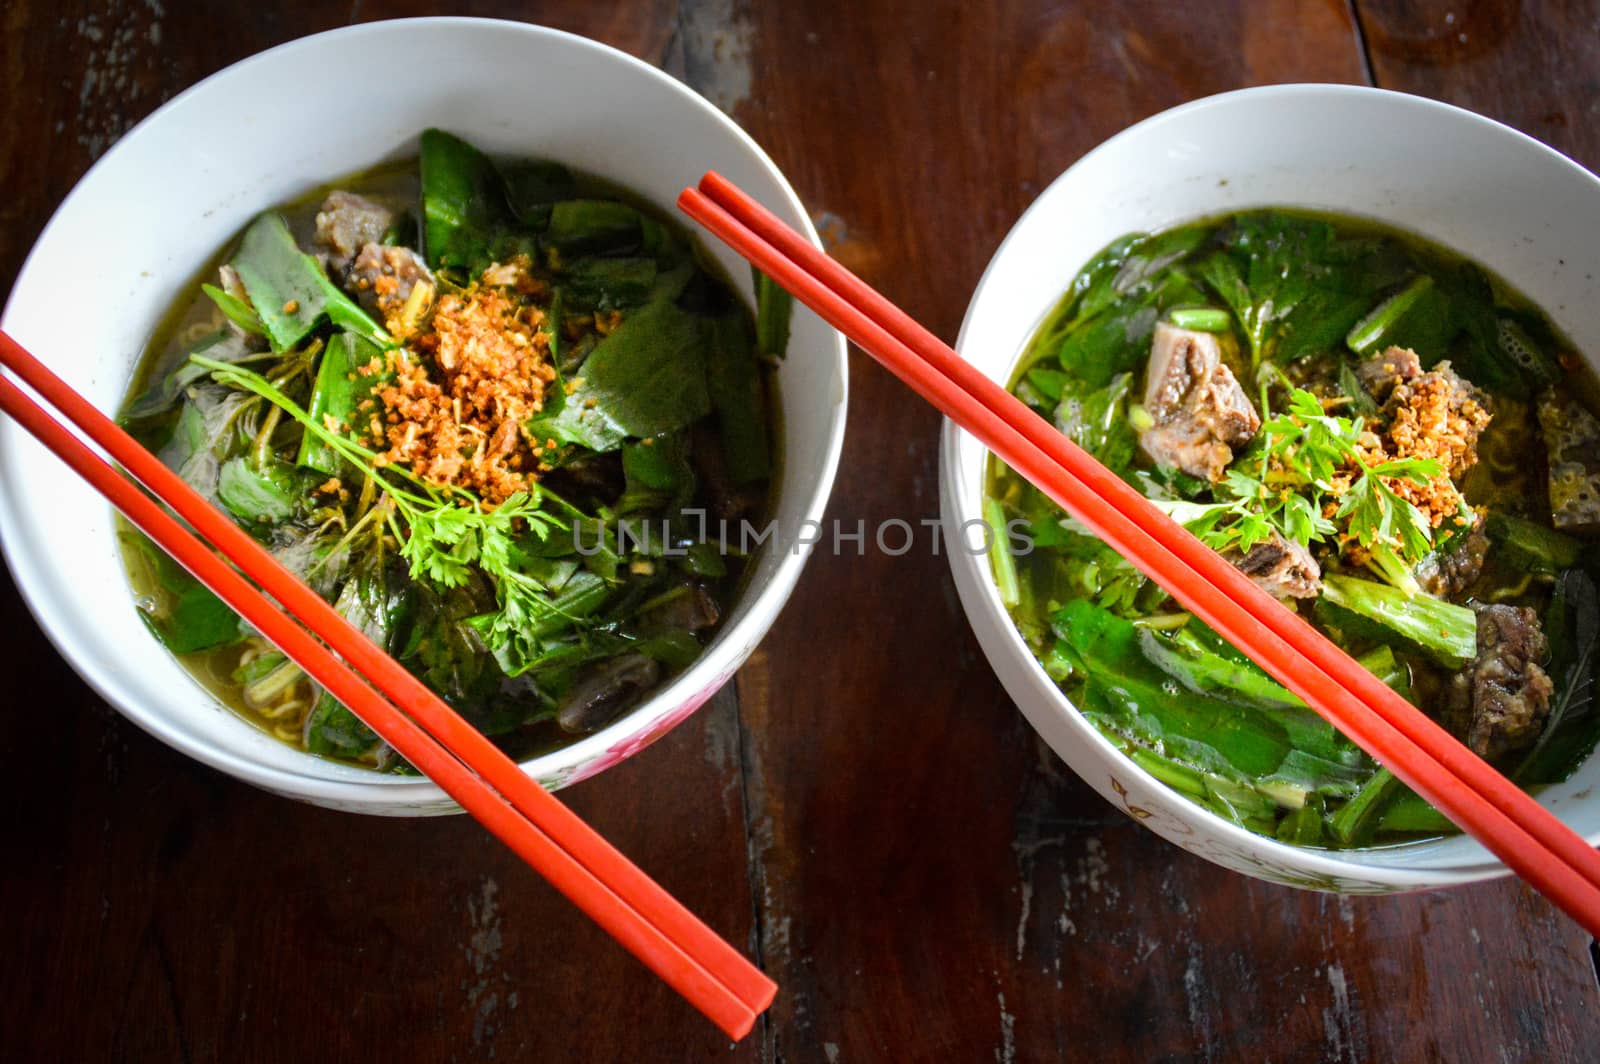 Top view of two bowls of traditional khmer noodles soup called Kuyteav or katiew